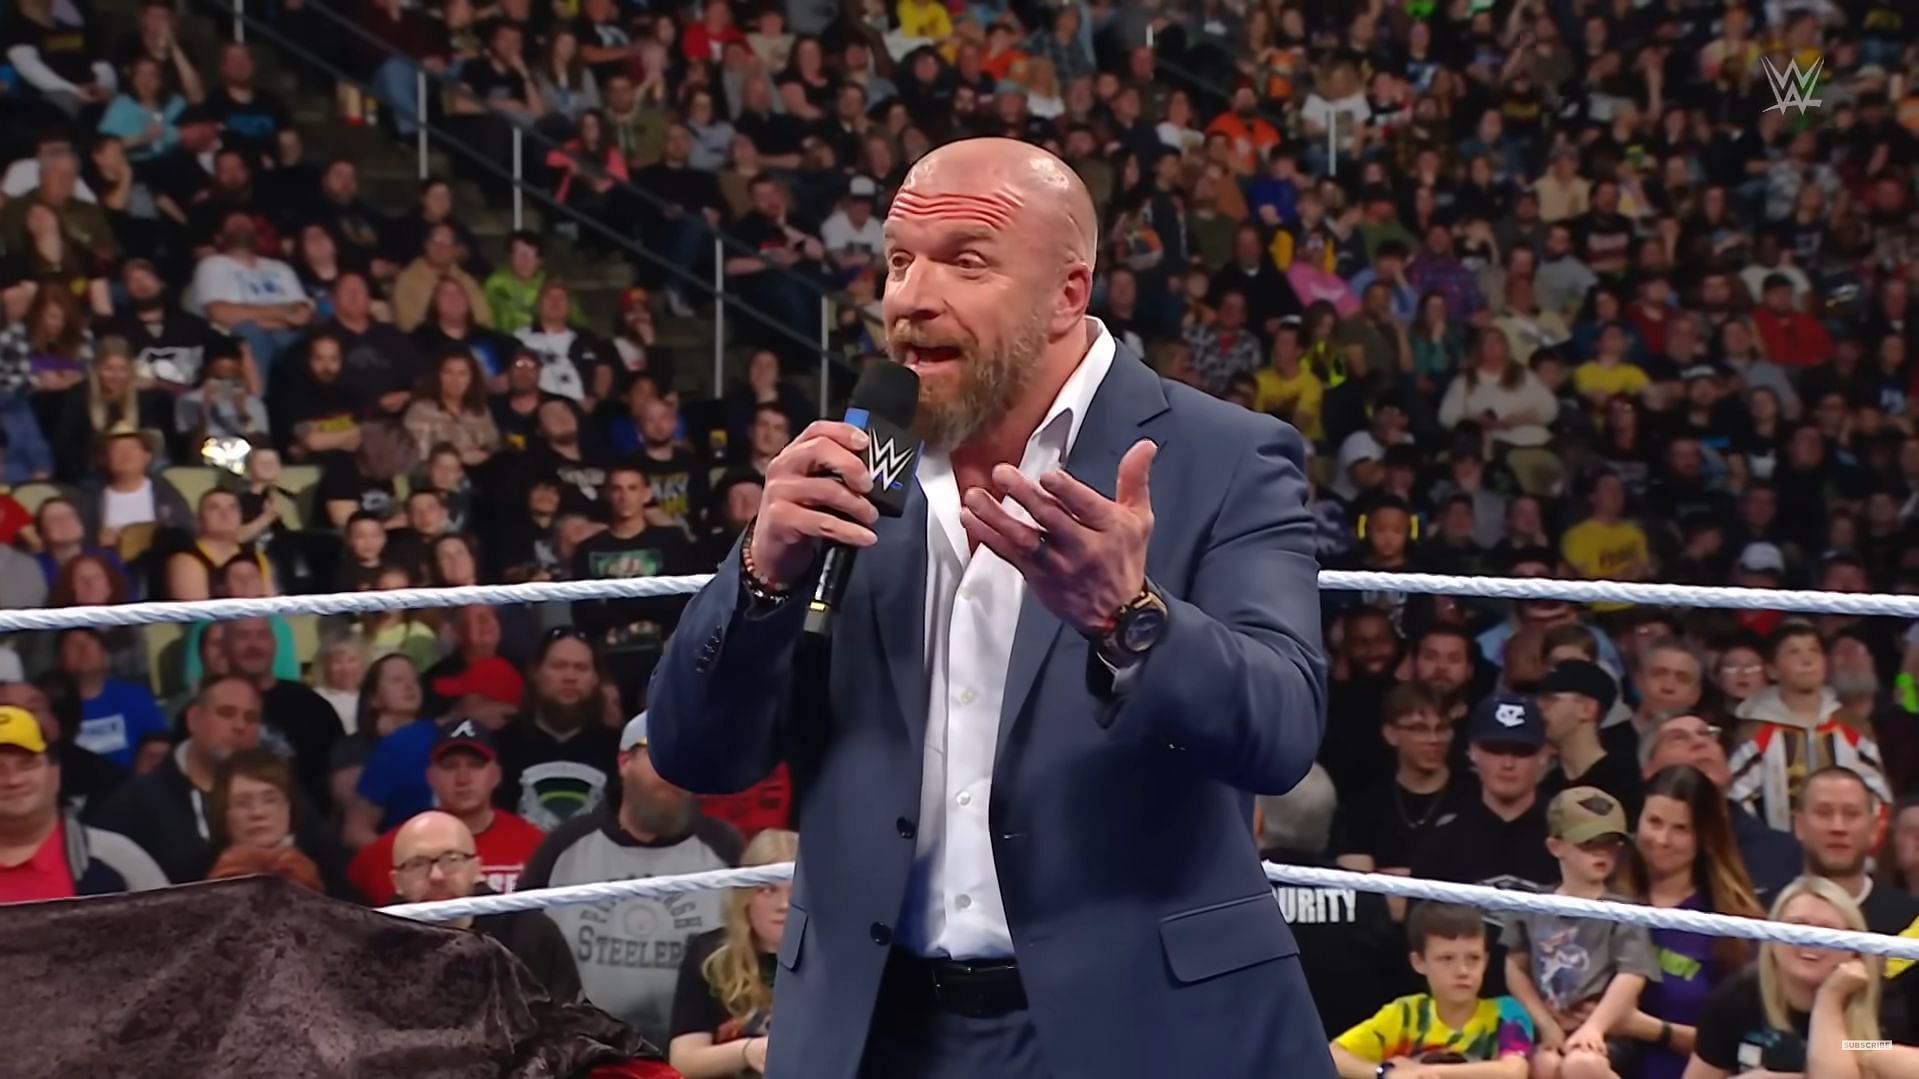 Fans would love for WWE CCO Triple H to acknowledge his big feat (via WWE